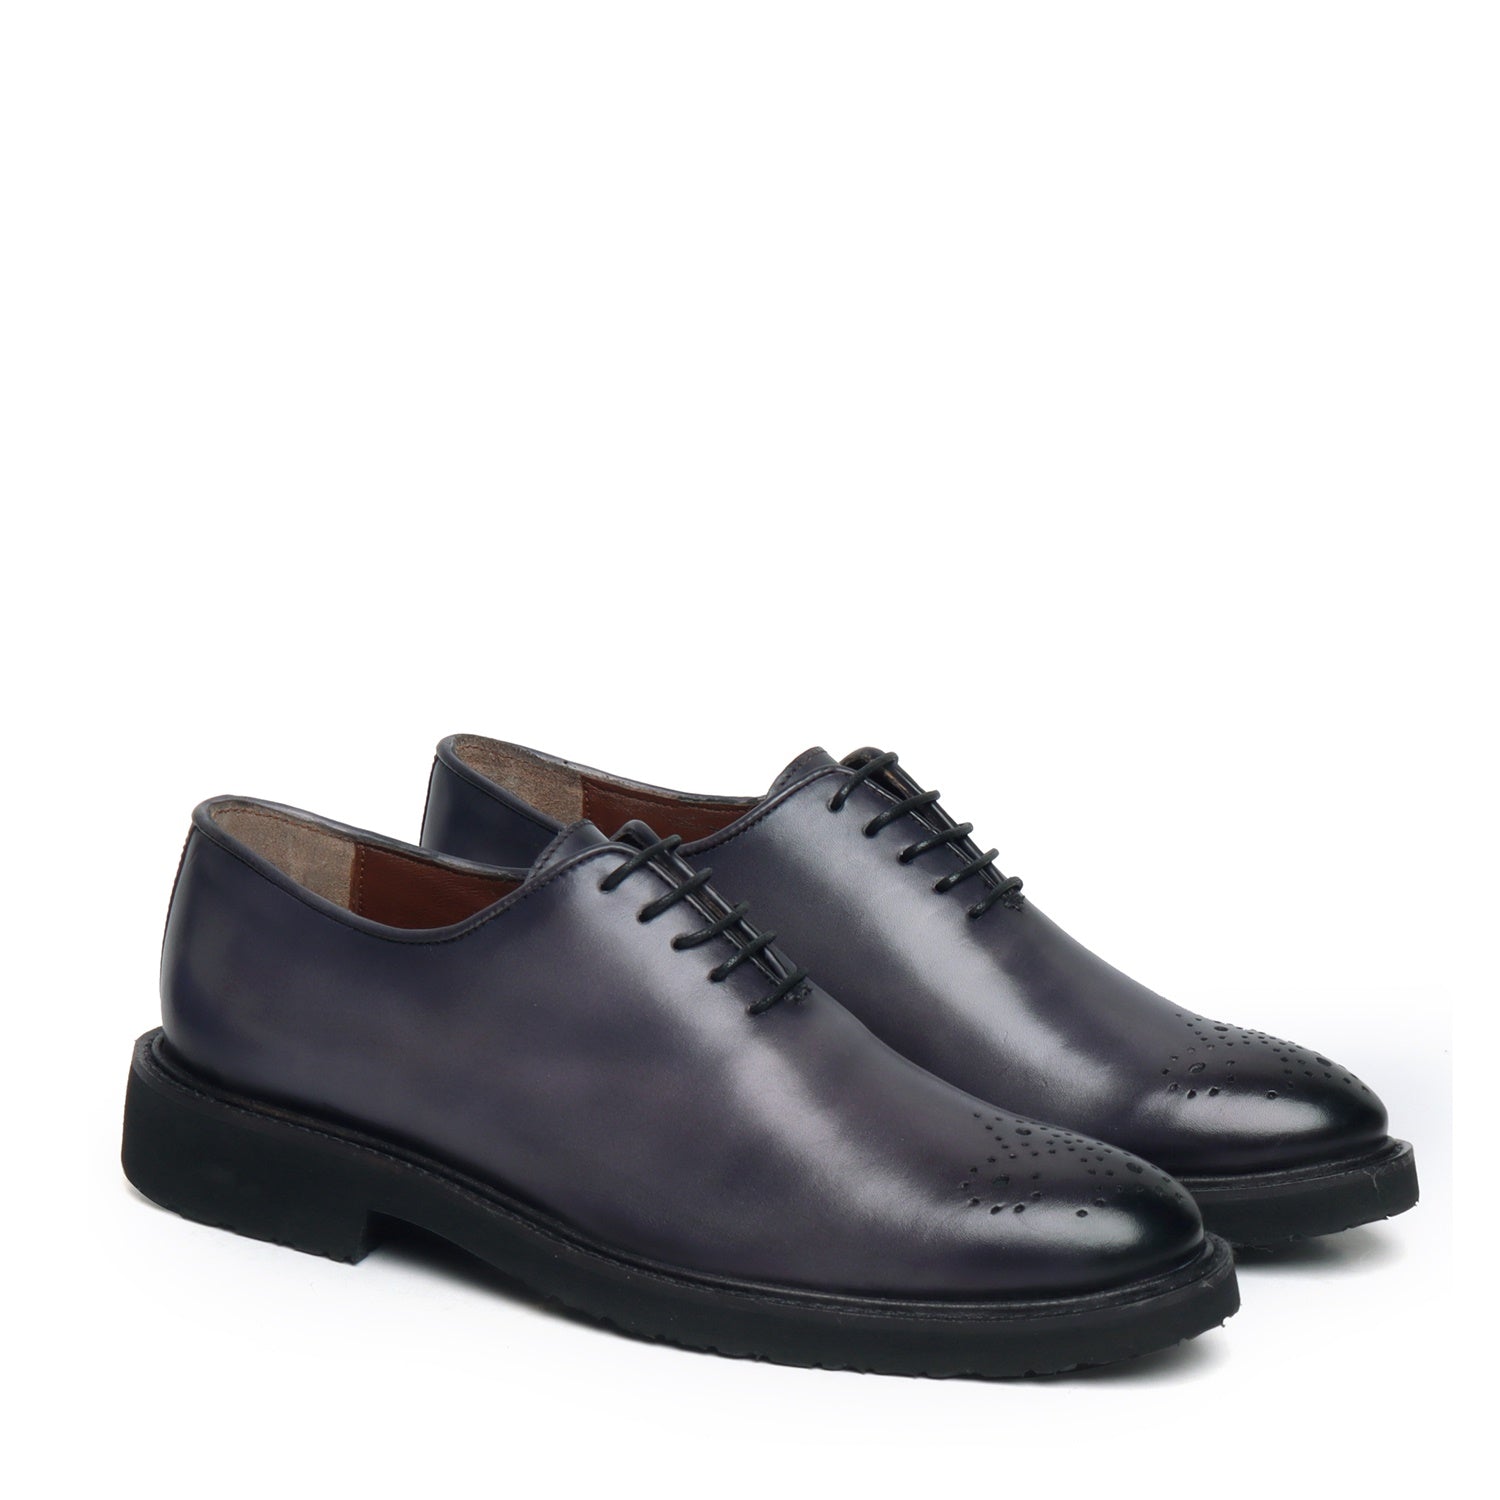 Lightweight Oxford Shoes Grey Leather Whole Cut/One Piece Medallion Toe By Brune & Bareskin